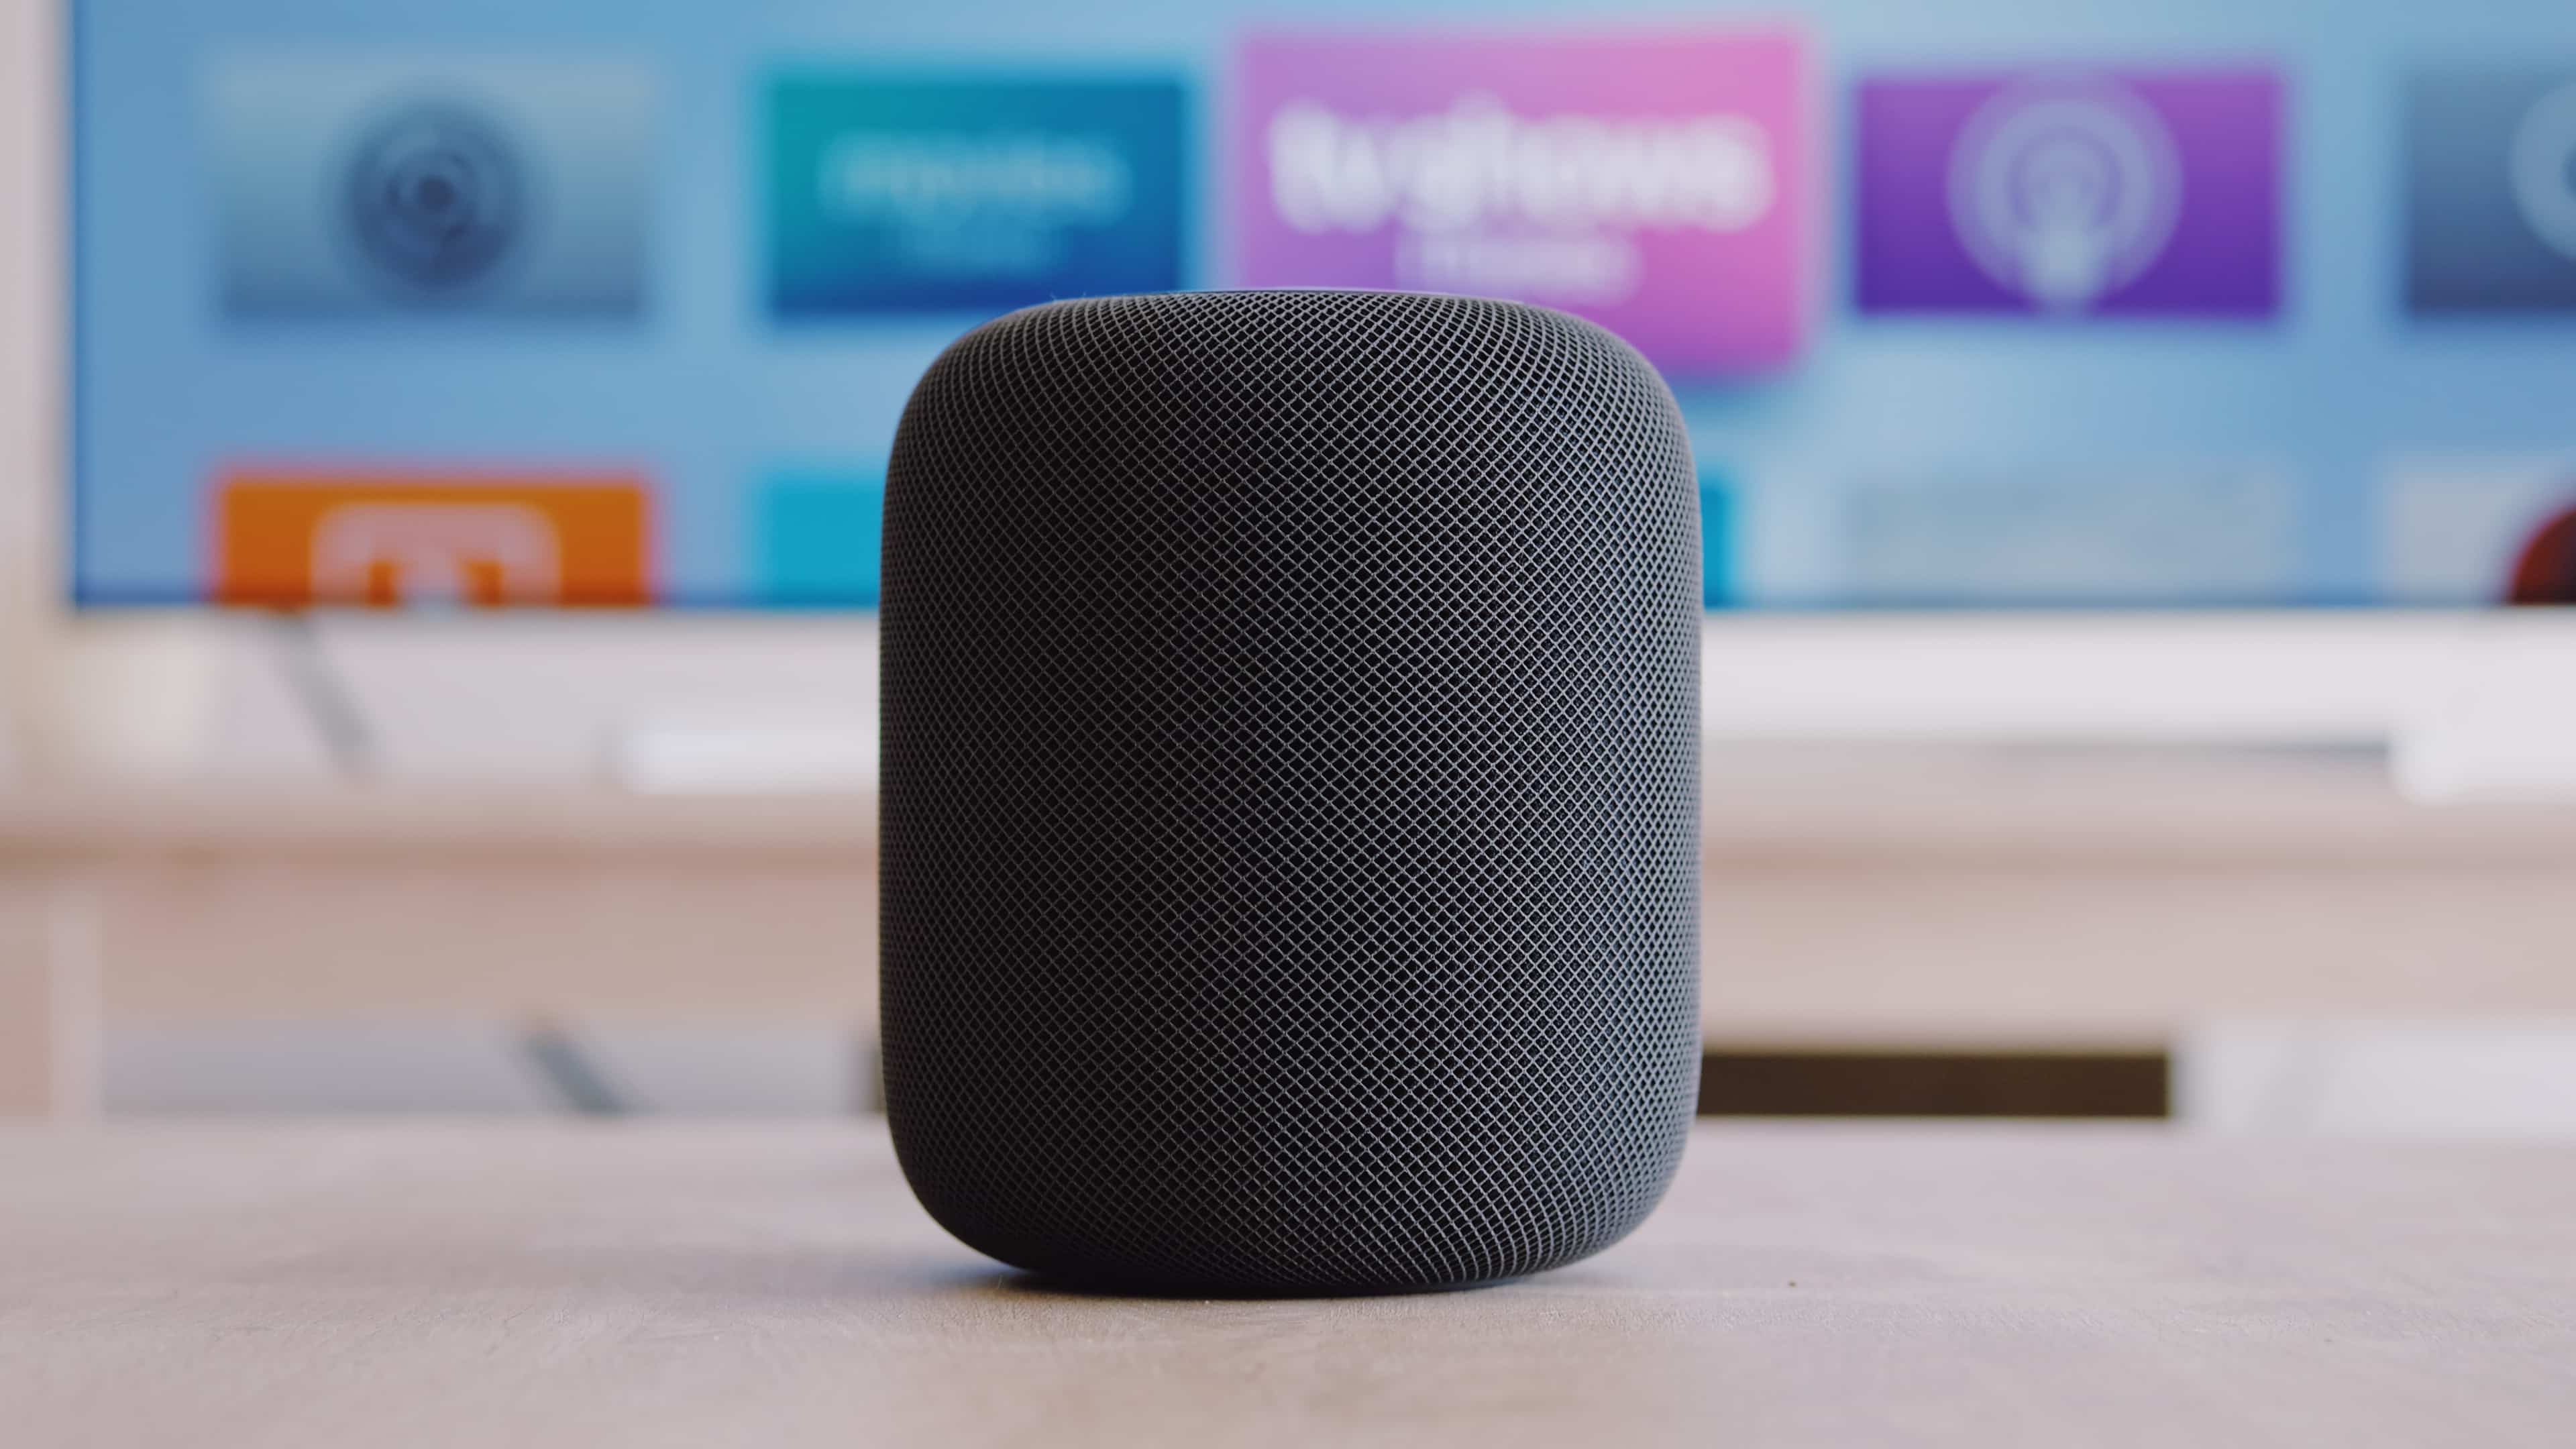 Don’t expect a screen-equipped HomePod until 2025 at the earliest